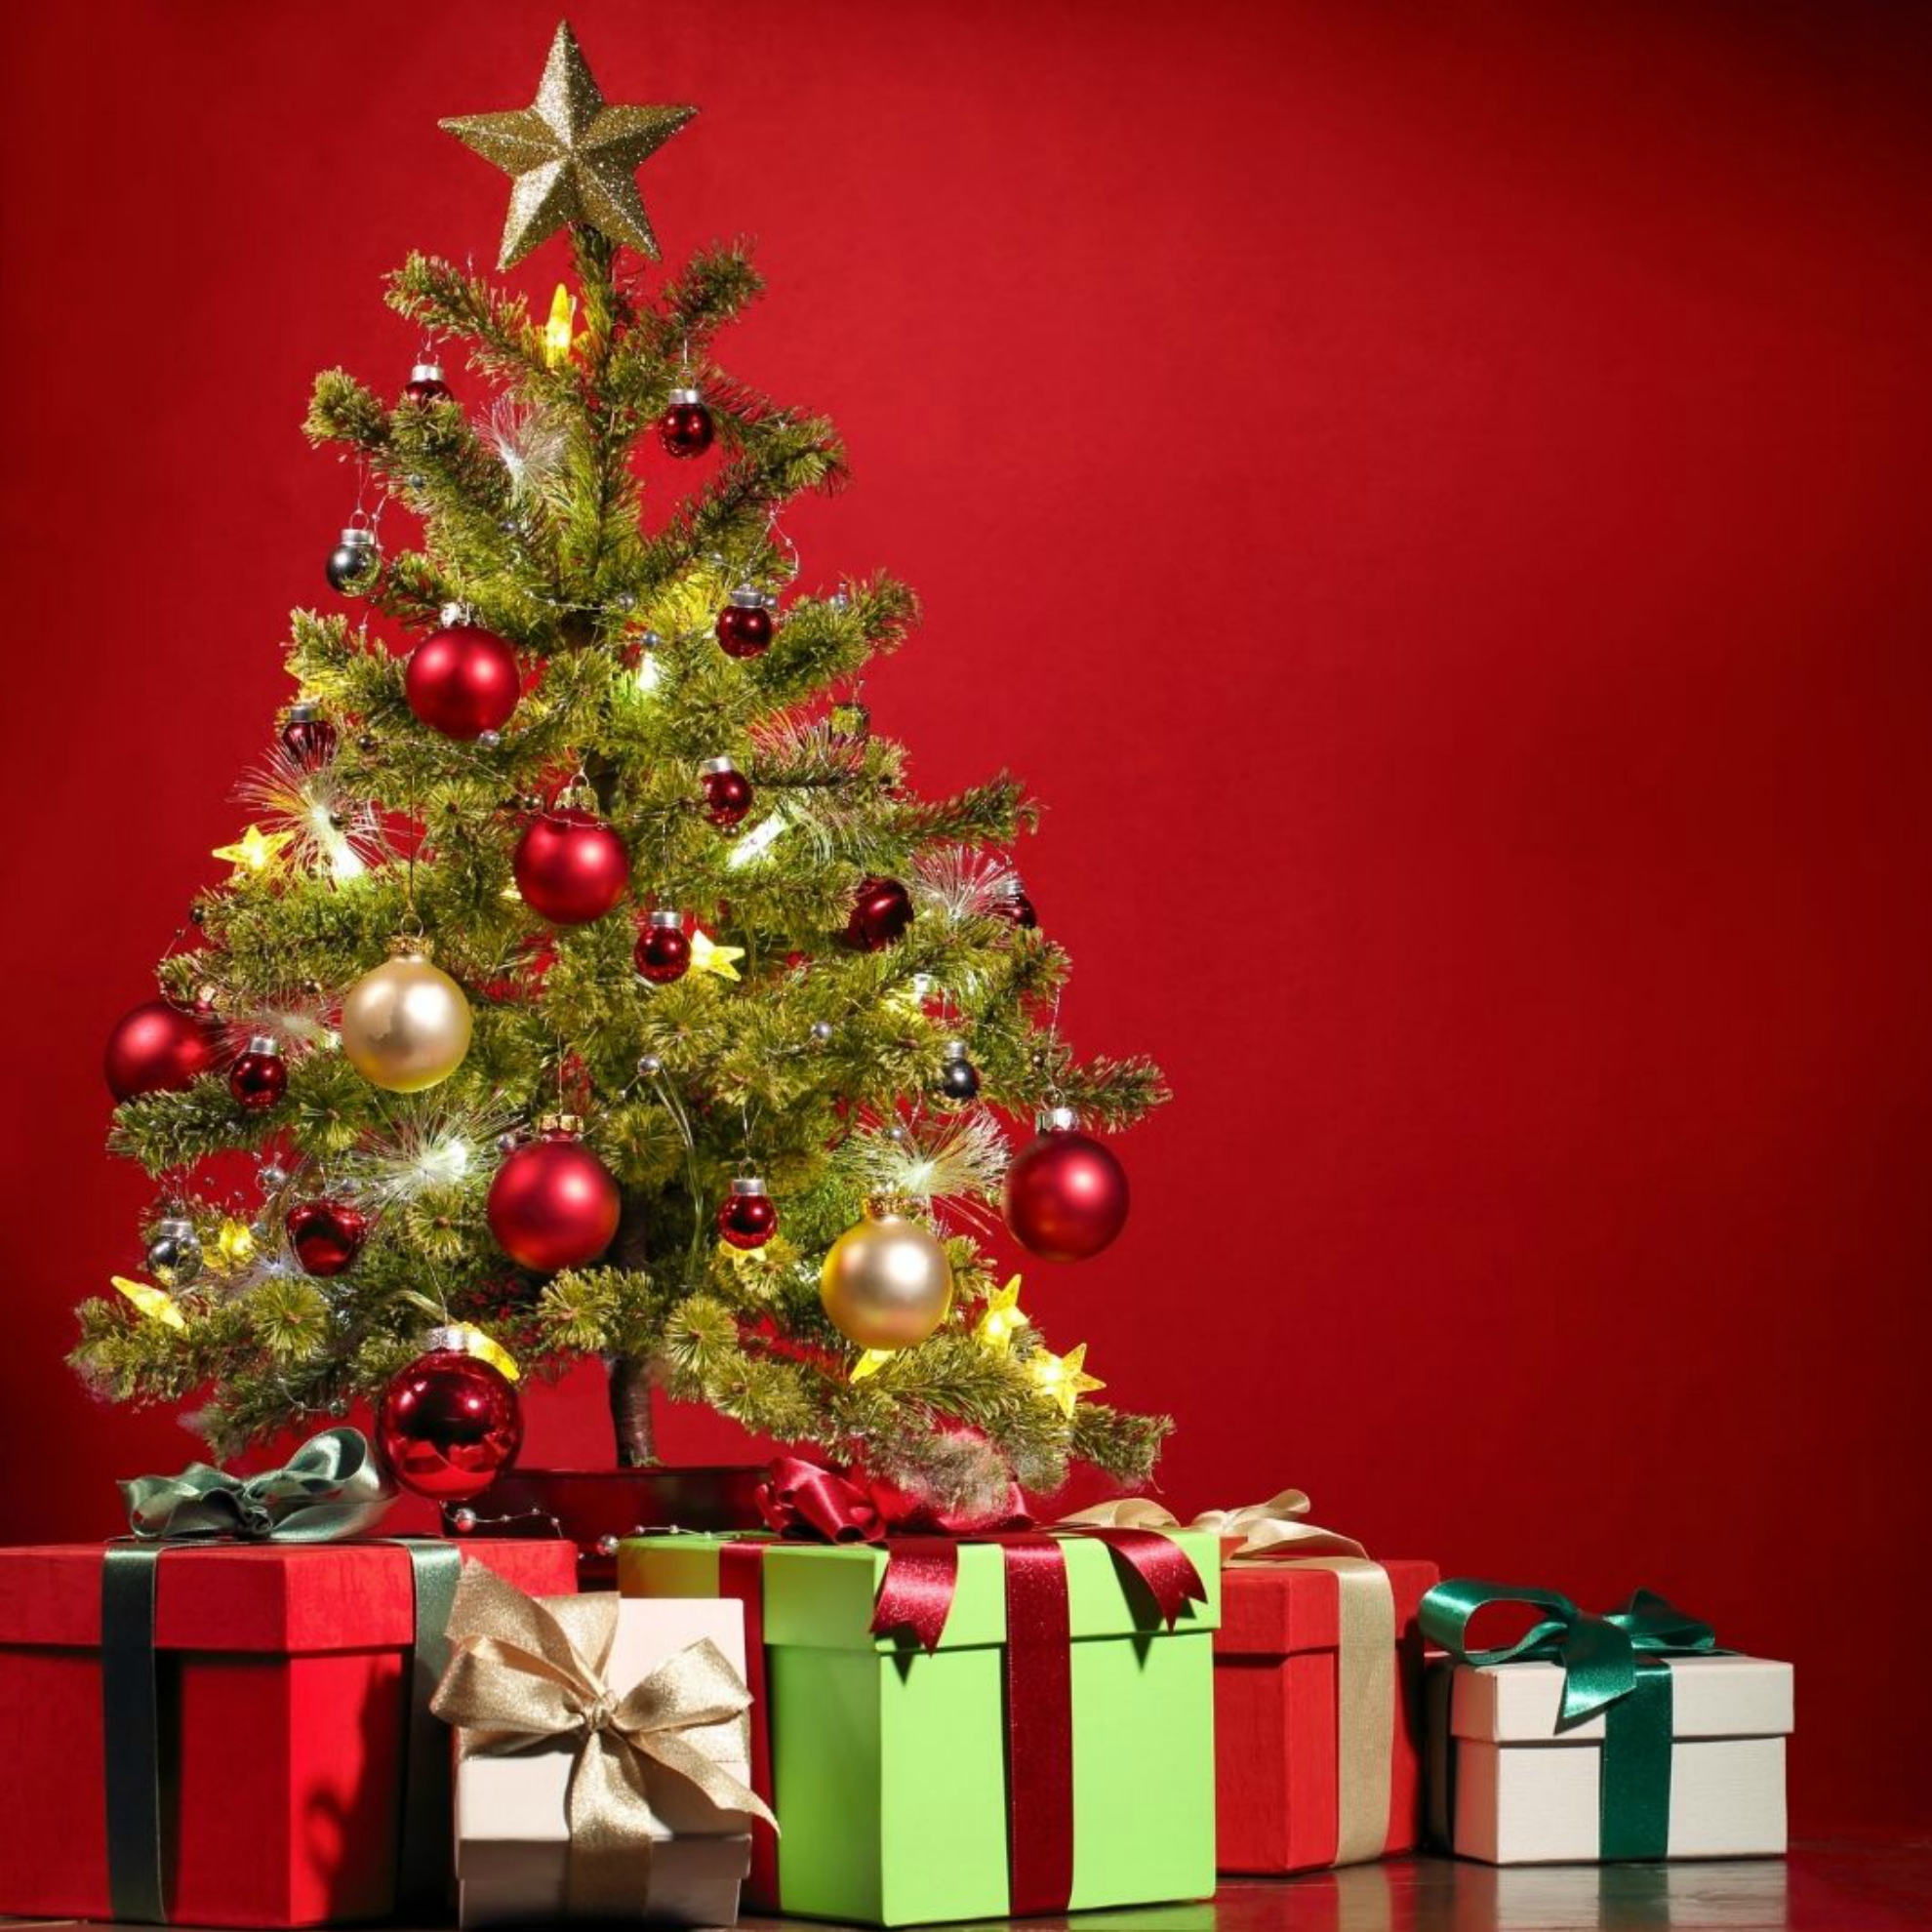 The 5 types of the Most Common and Popular Christmas Tree Decorations